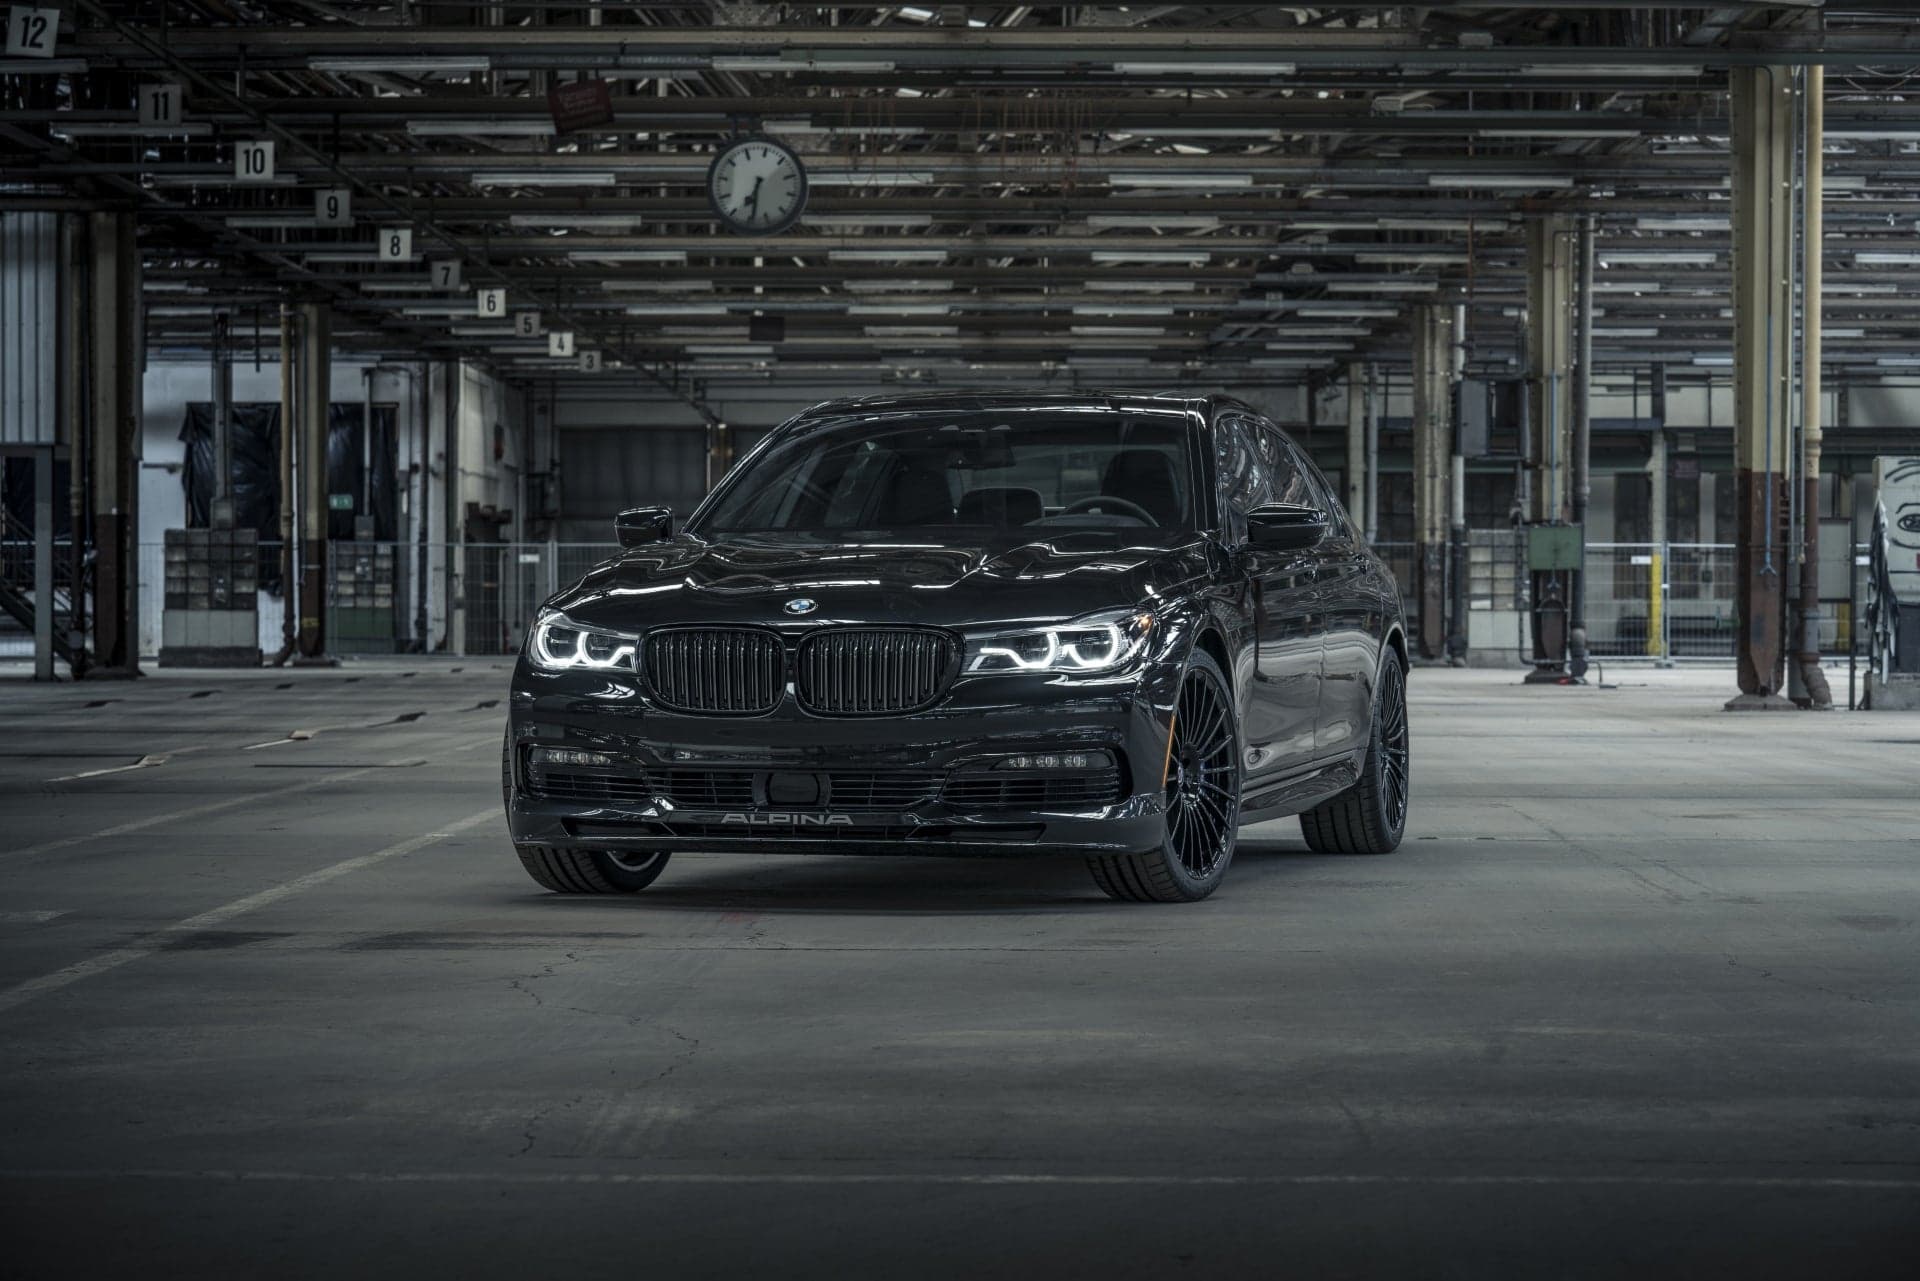 BMW Alpina B7 Exclusive Edition: Cementing the Partnership Between Country & Company